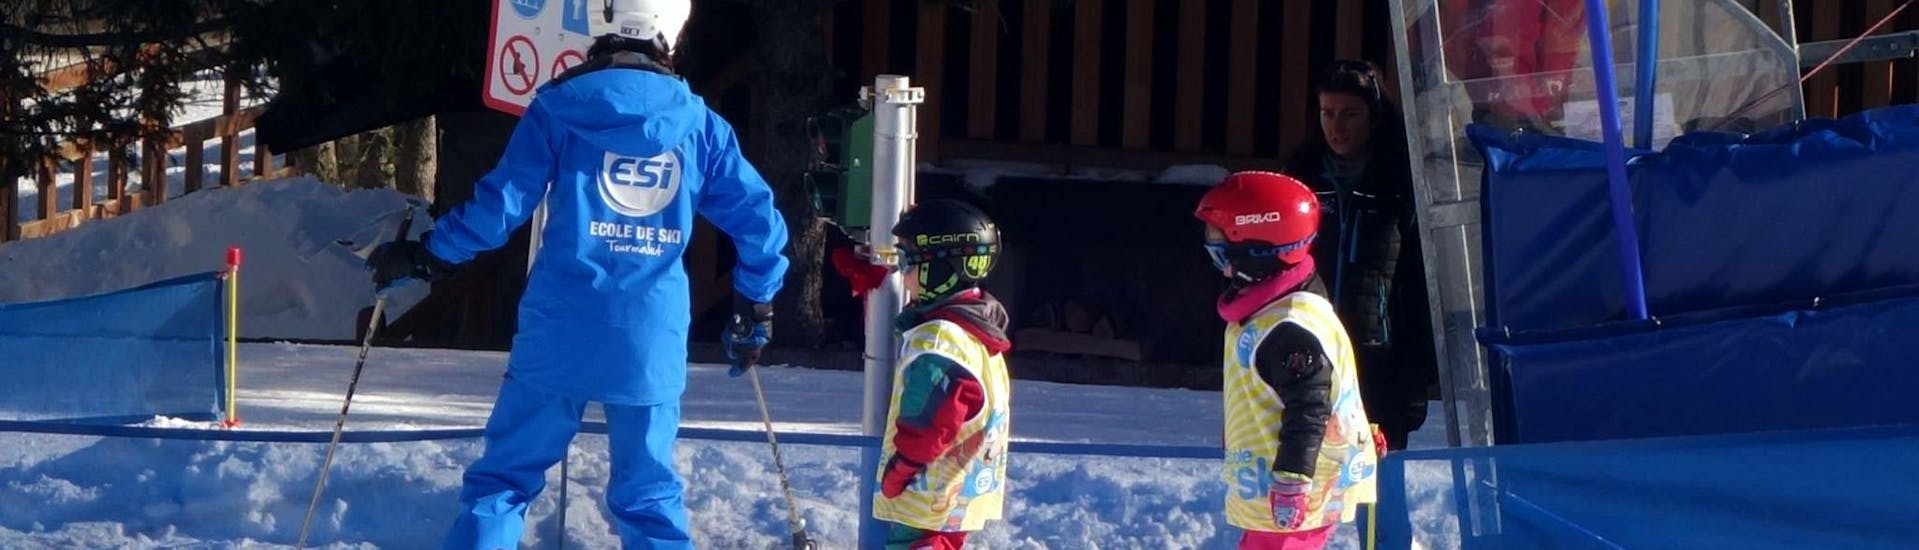 Young skiers are following their ski instructor from the ski school ESI du Tourmalet in La Mongie during their Kids Ski Lessons "Club Mont et Souris" (3-4 years) in the safety of the snowgarden.